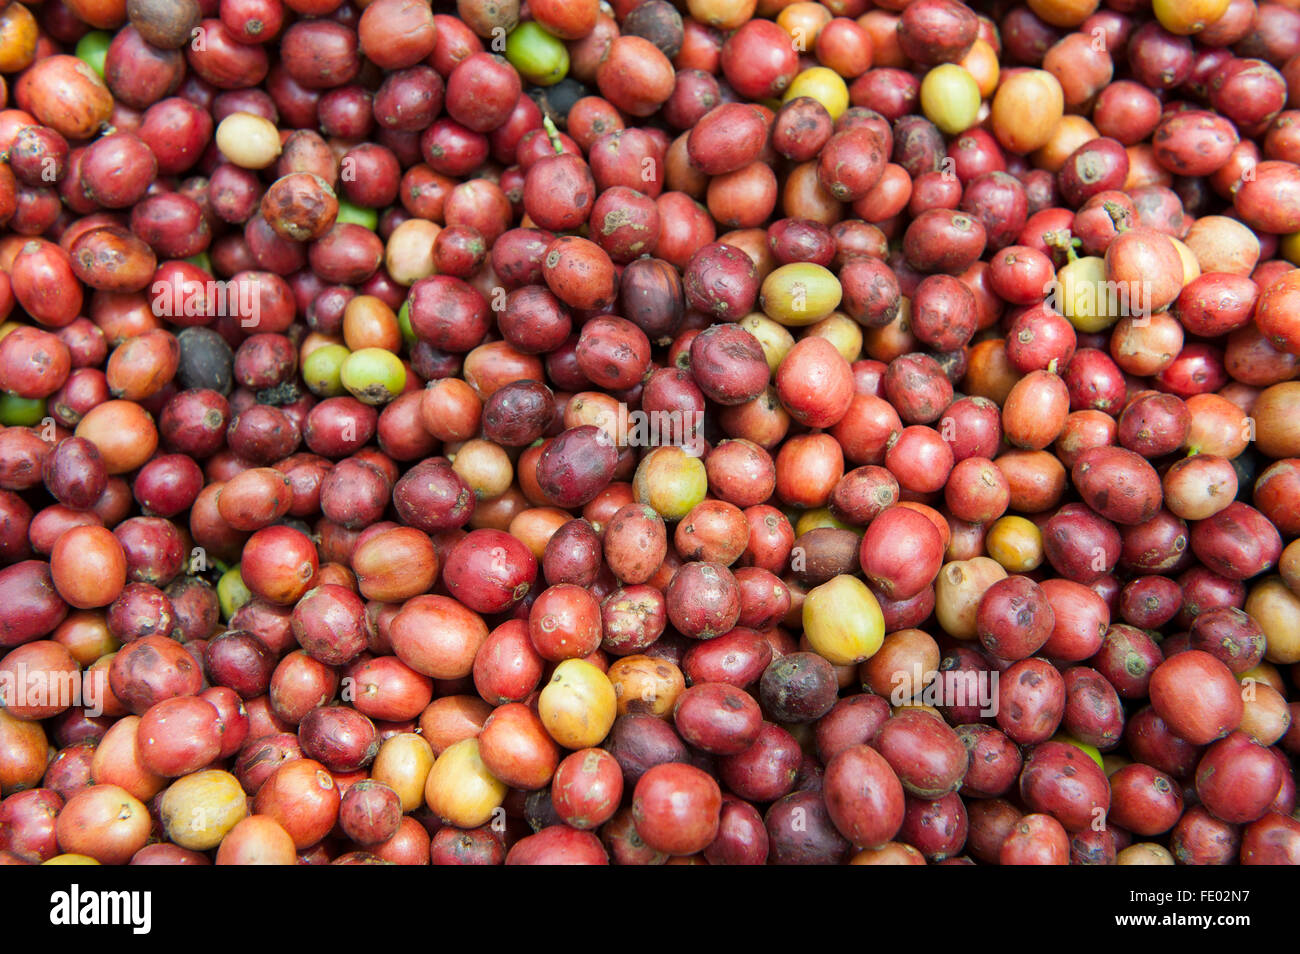 Unshelled, freshly picked coffee beans ready to be dried. Uganda. Stock Photo